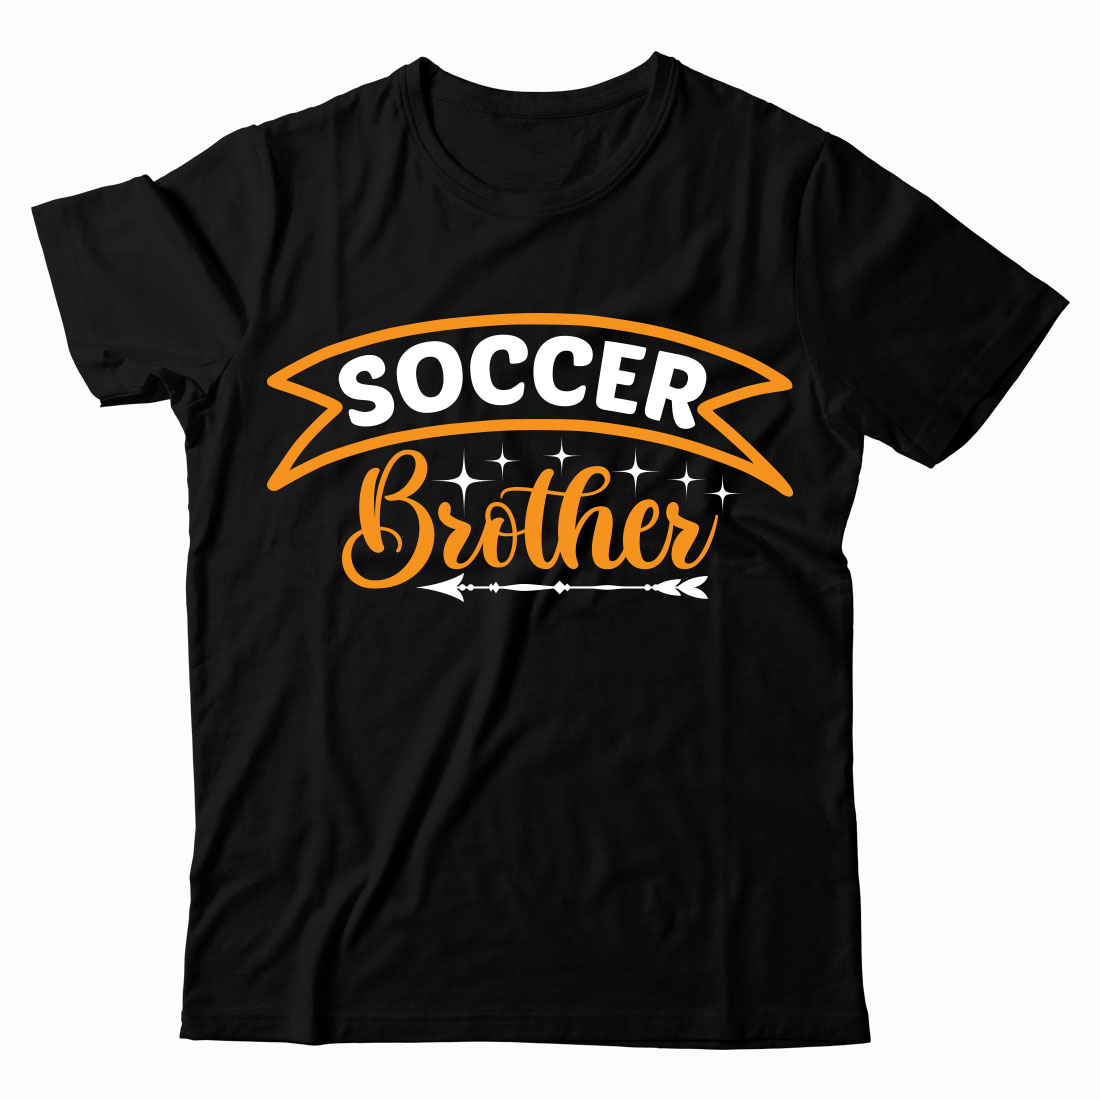 Black t - shirt with the words soccer brother on it.